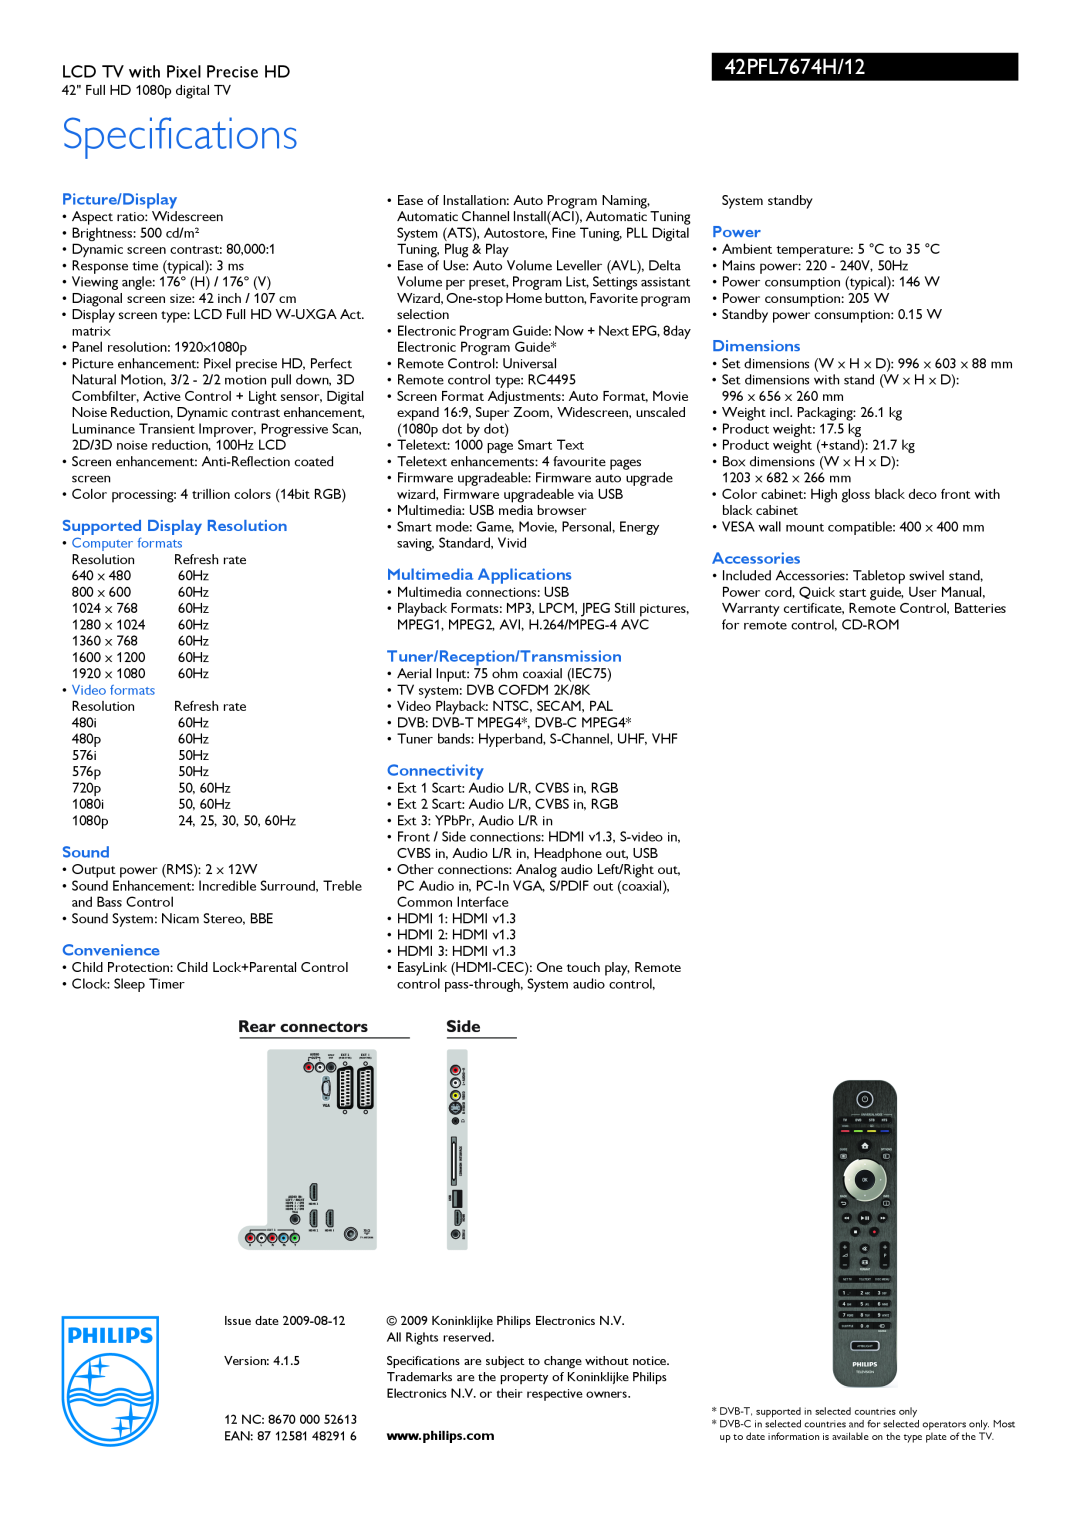 Philips 42PFL7674H Specifications, Picture/Display, Supported Display Resolution, Sound, Convenience, Connectivity, Power 